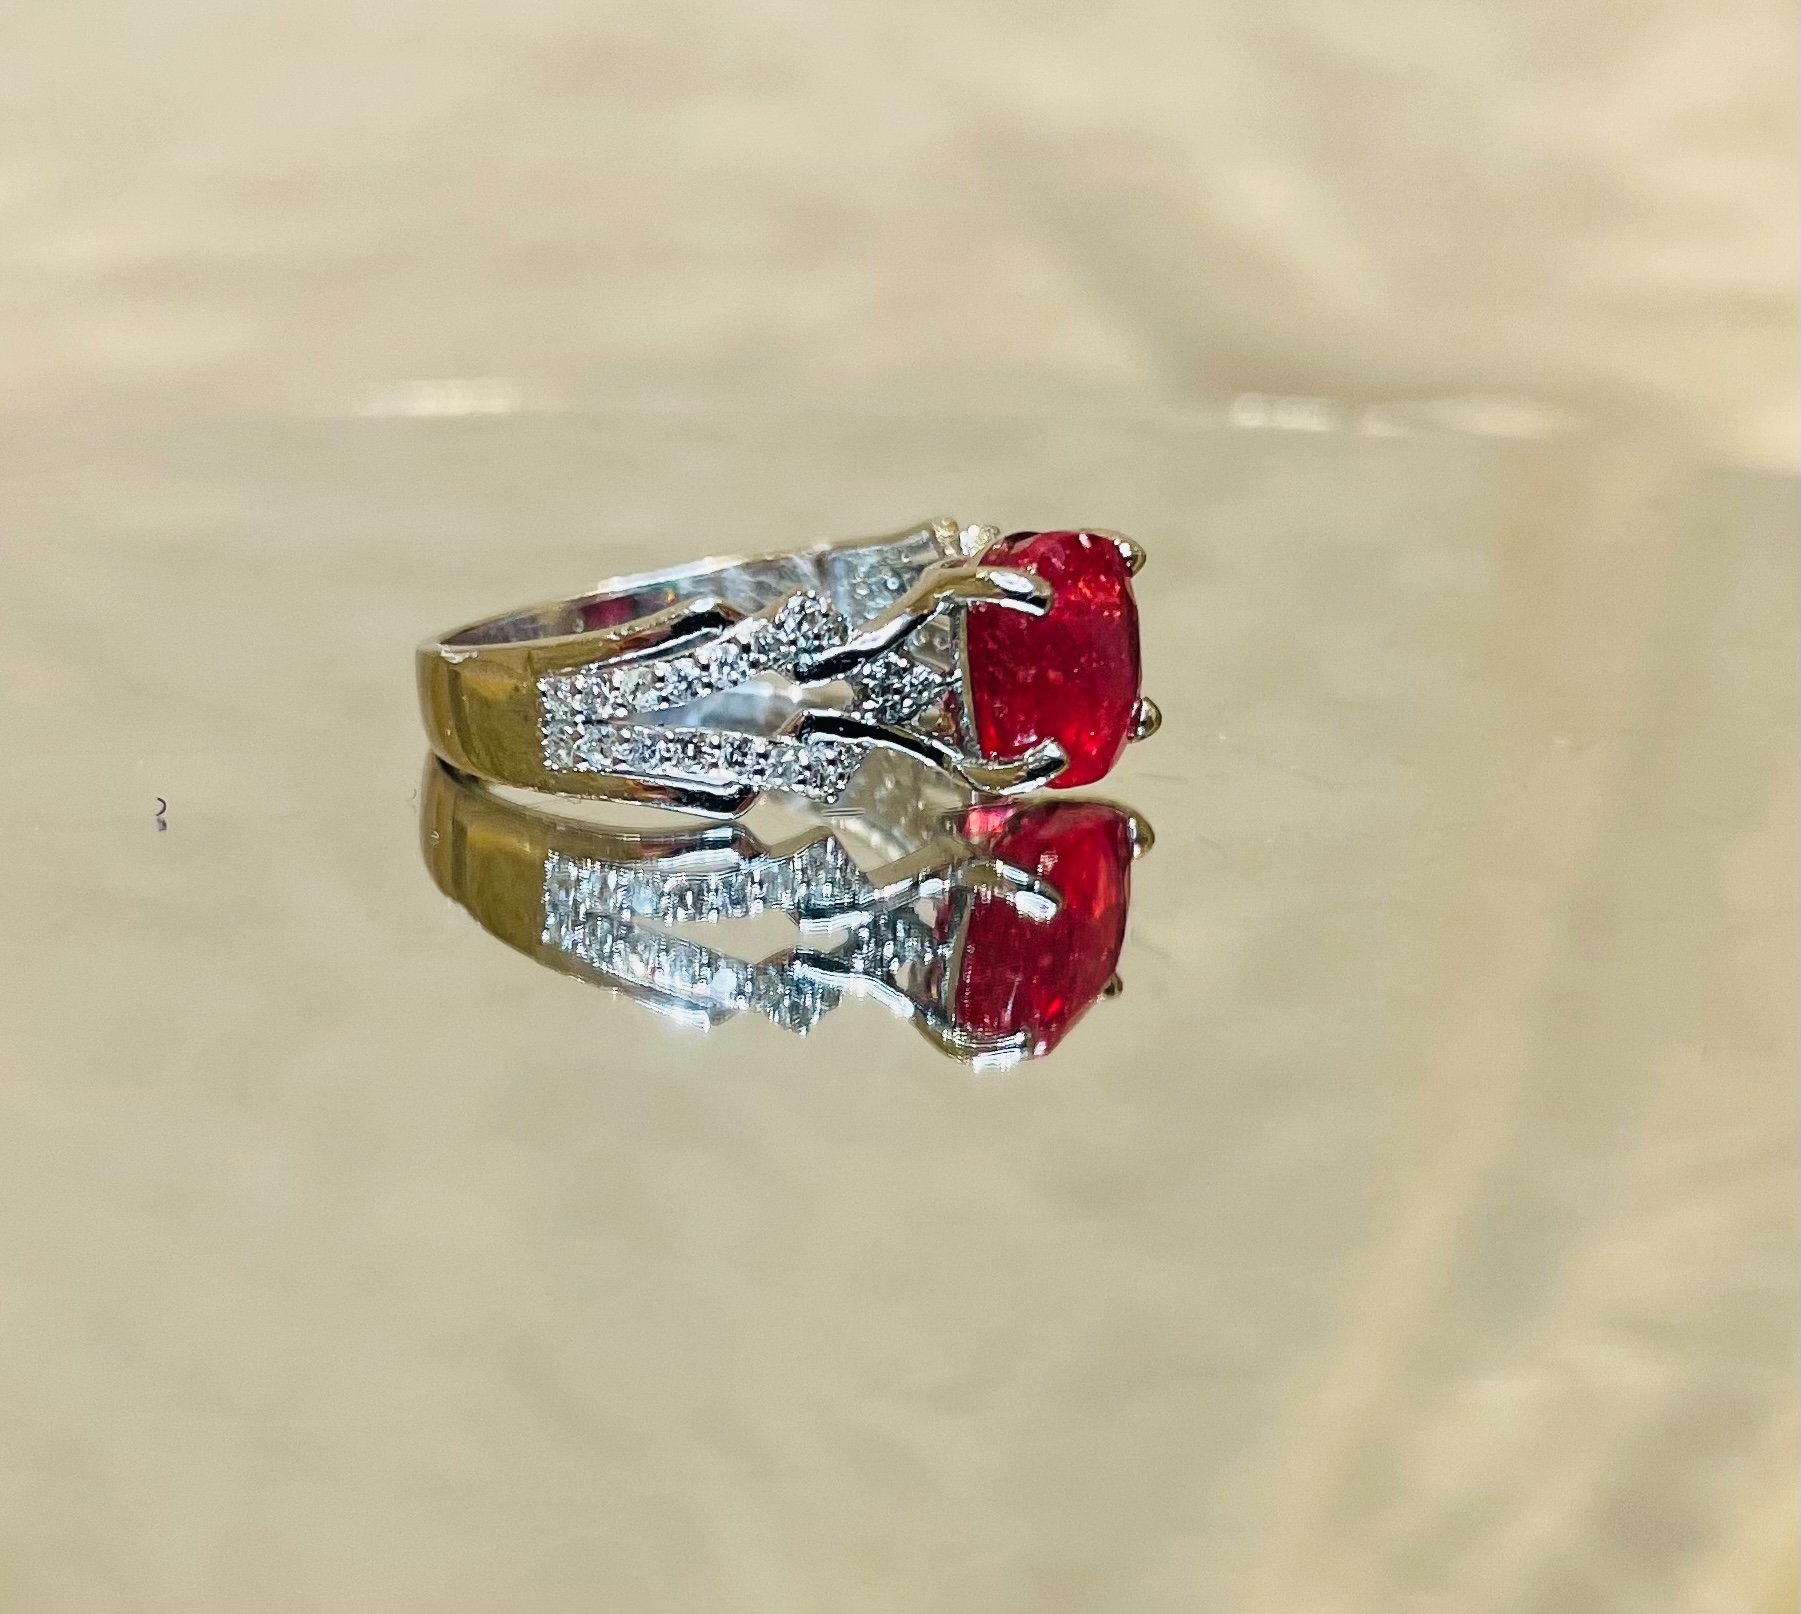 Natural Burmese Ruby Ring 3.35 Ct with Natural Diamonds & 18kGold - Image 5 of 5